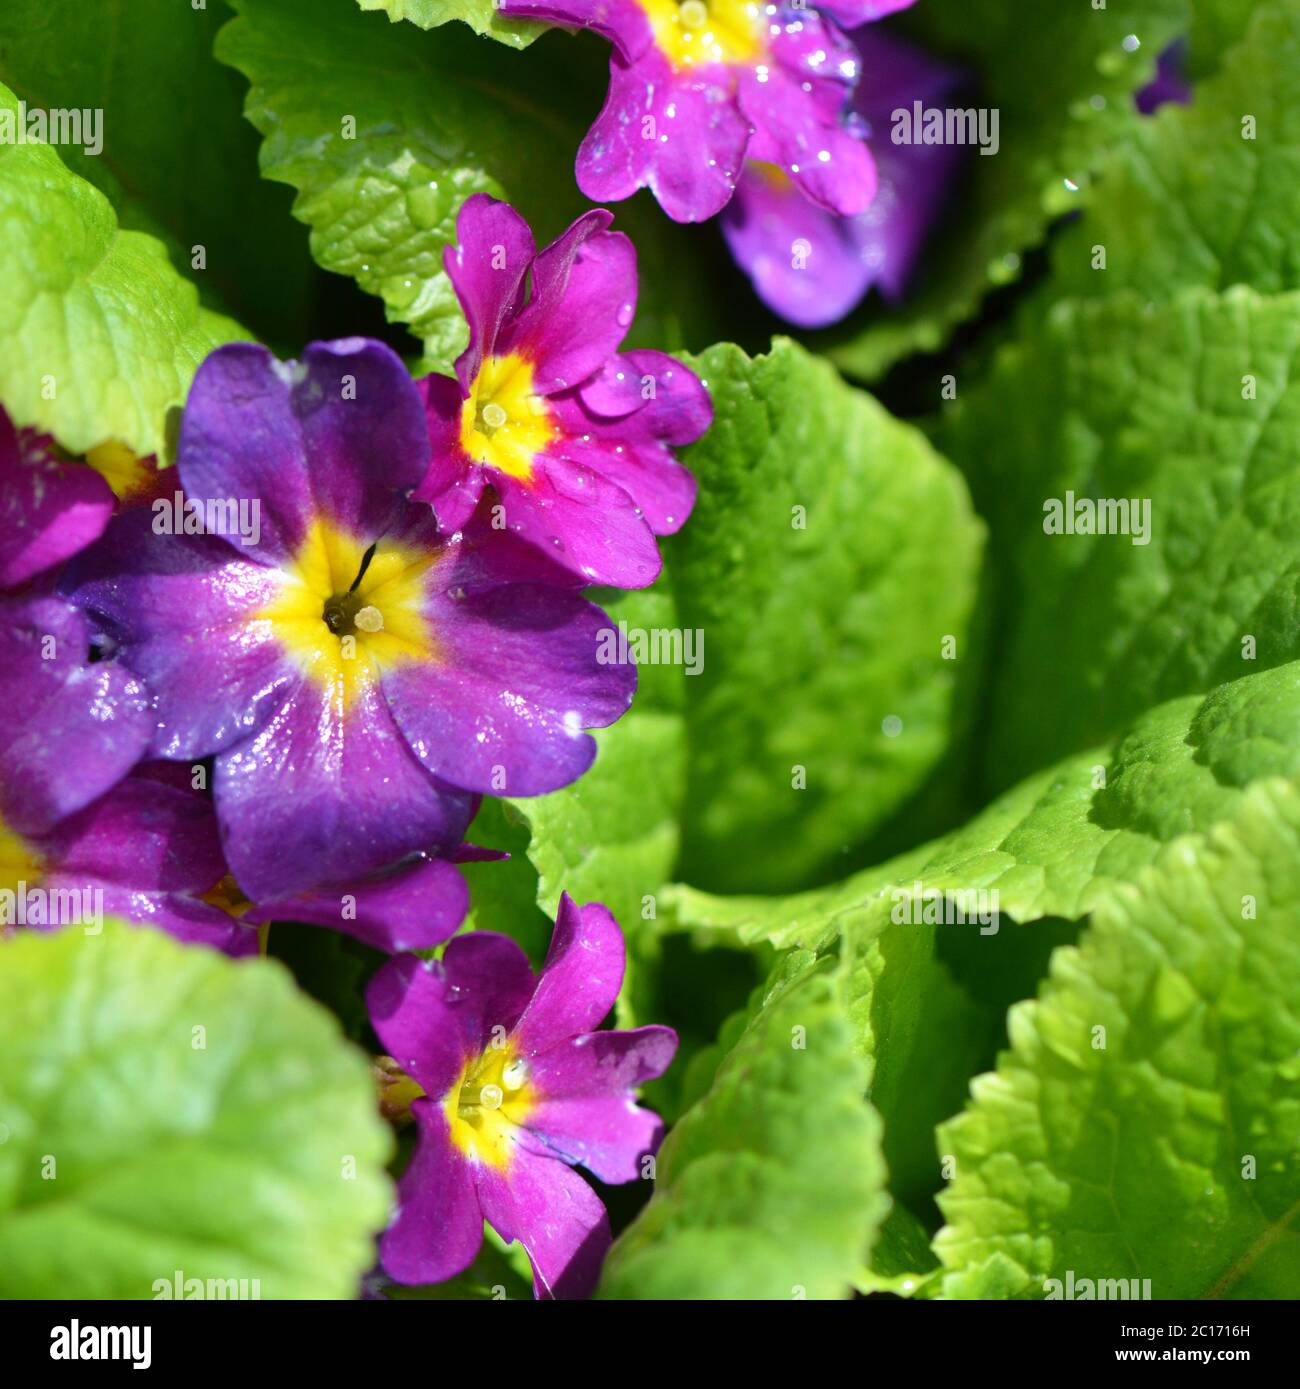 The flower lilac primrose a background Stock Photo